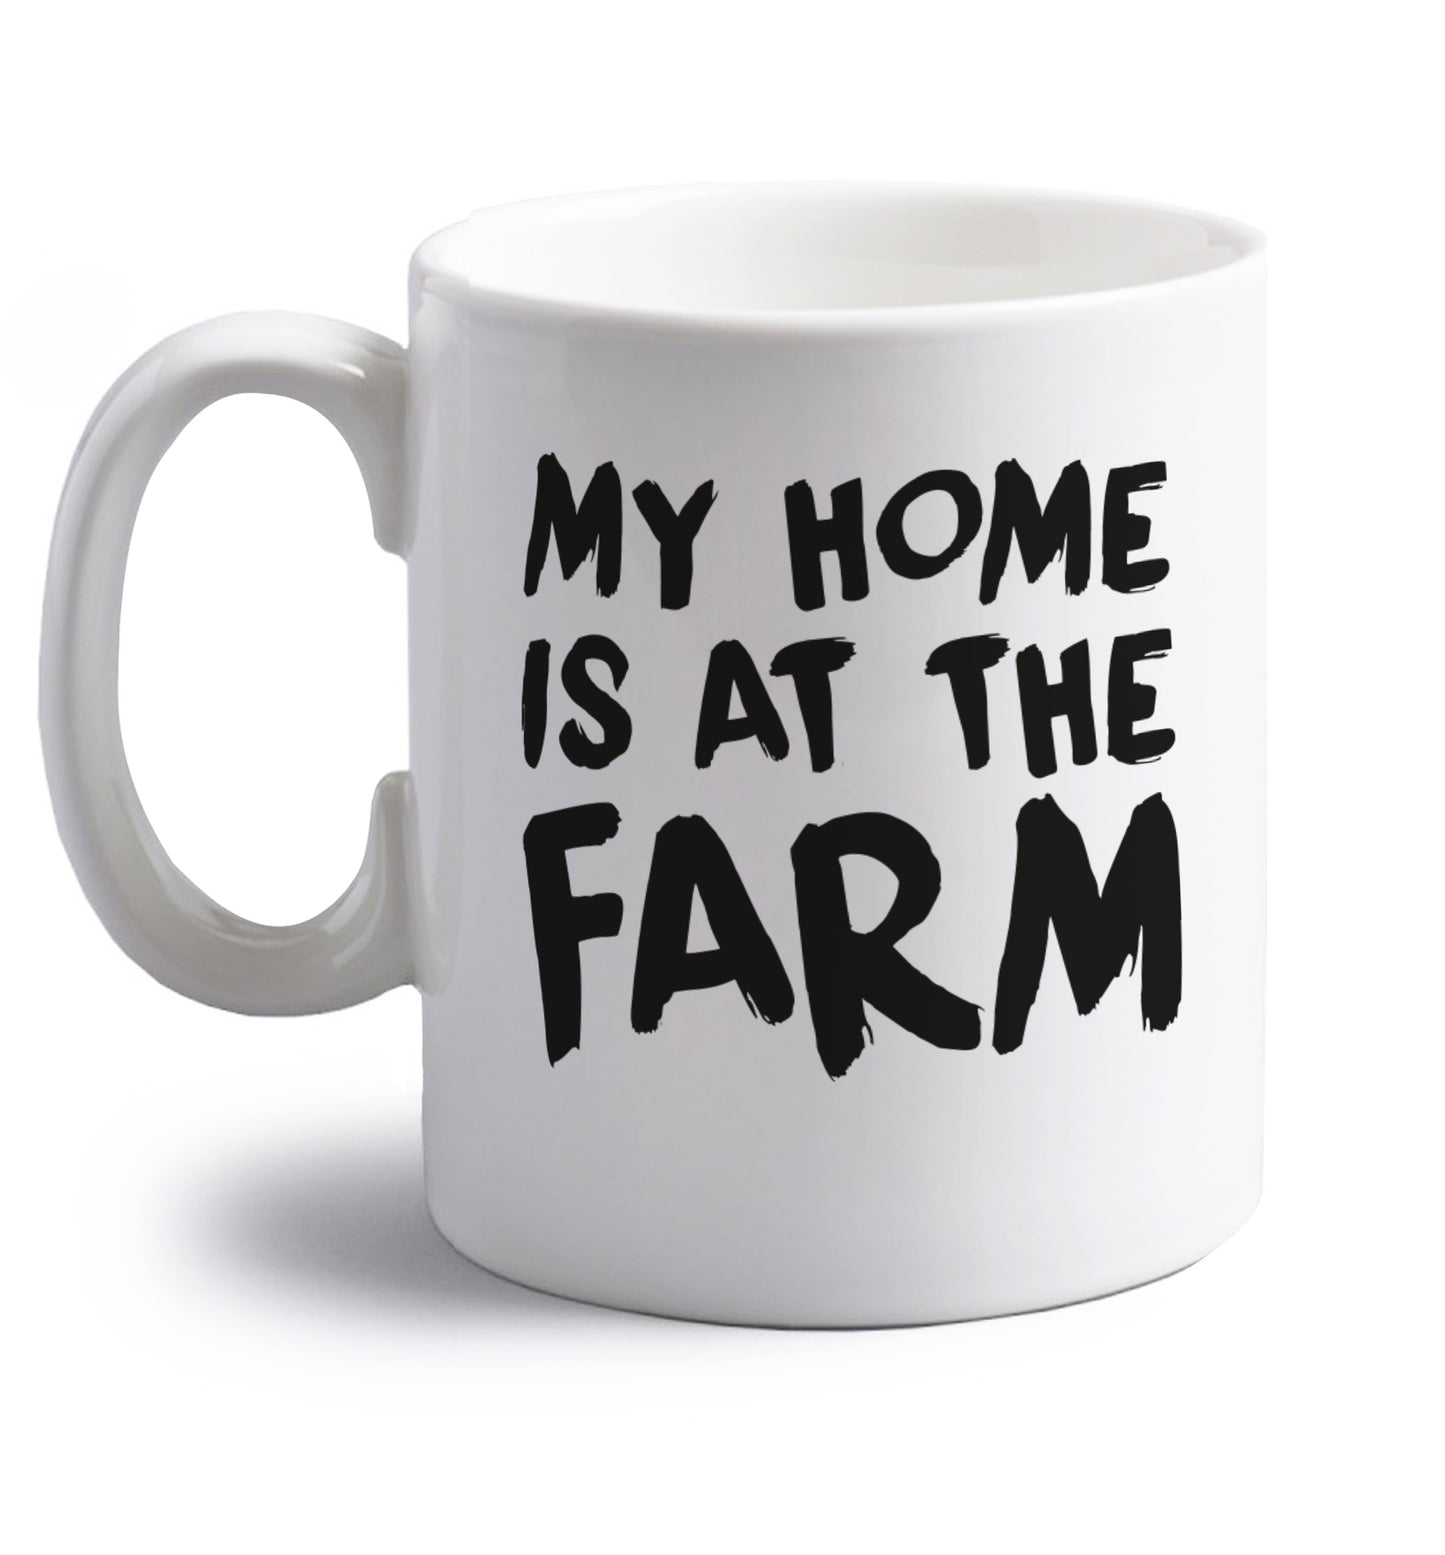 My home is at the farm right handed white ceramic mug 